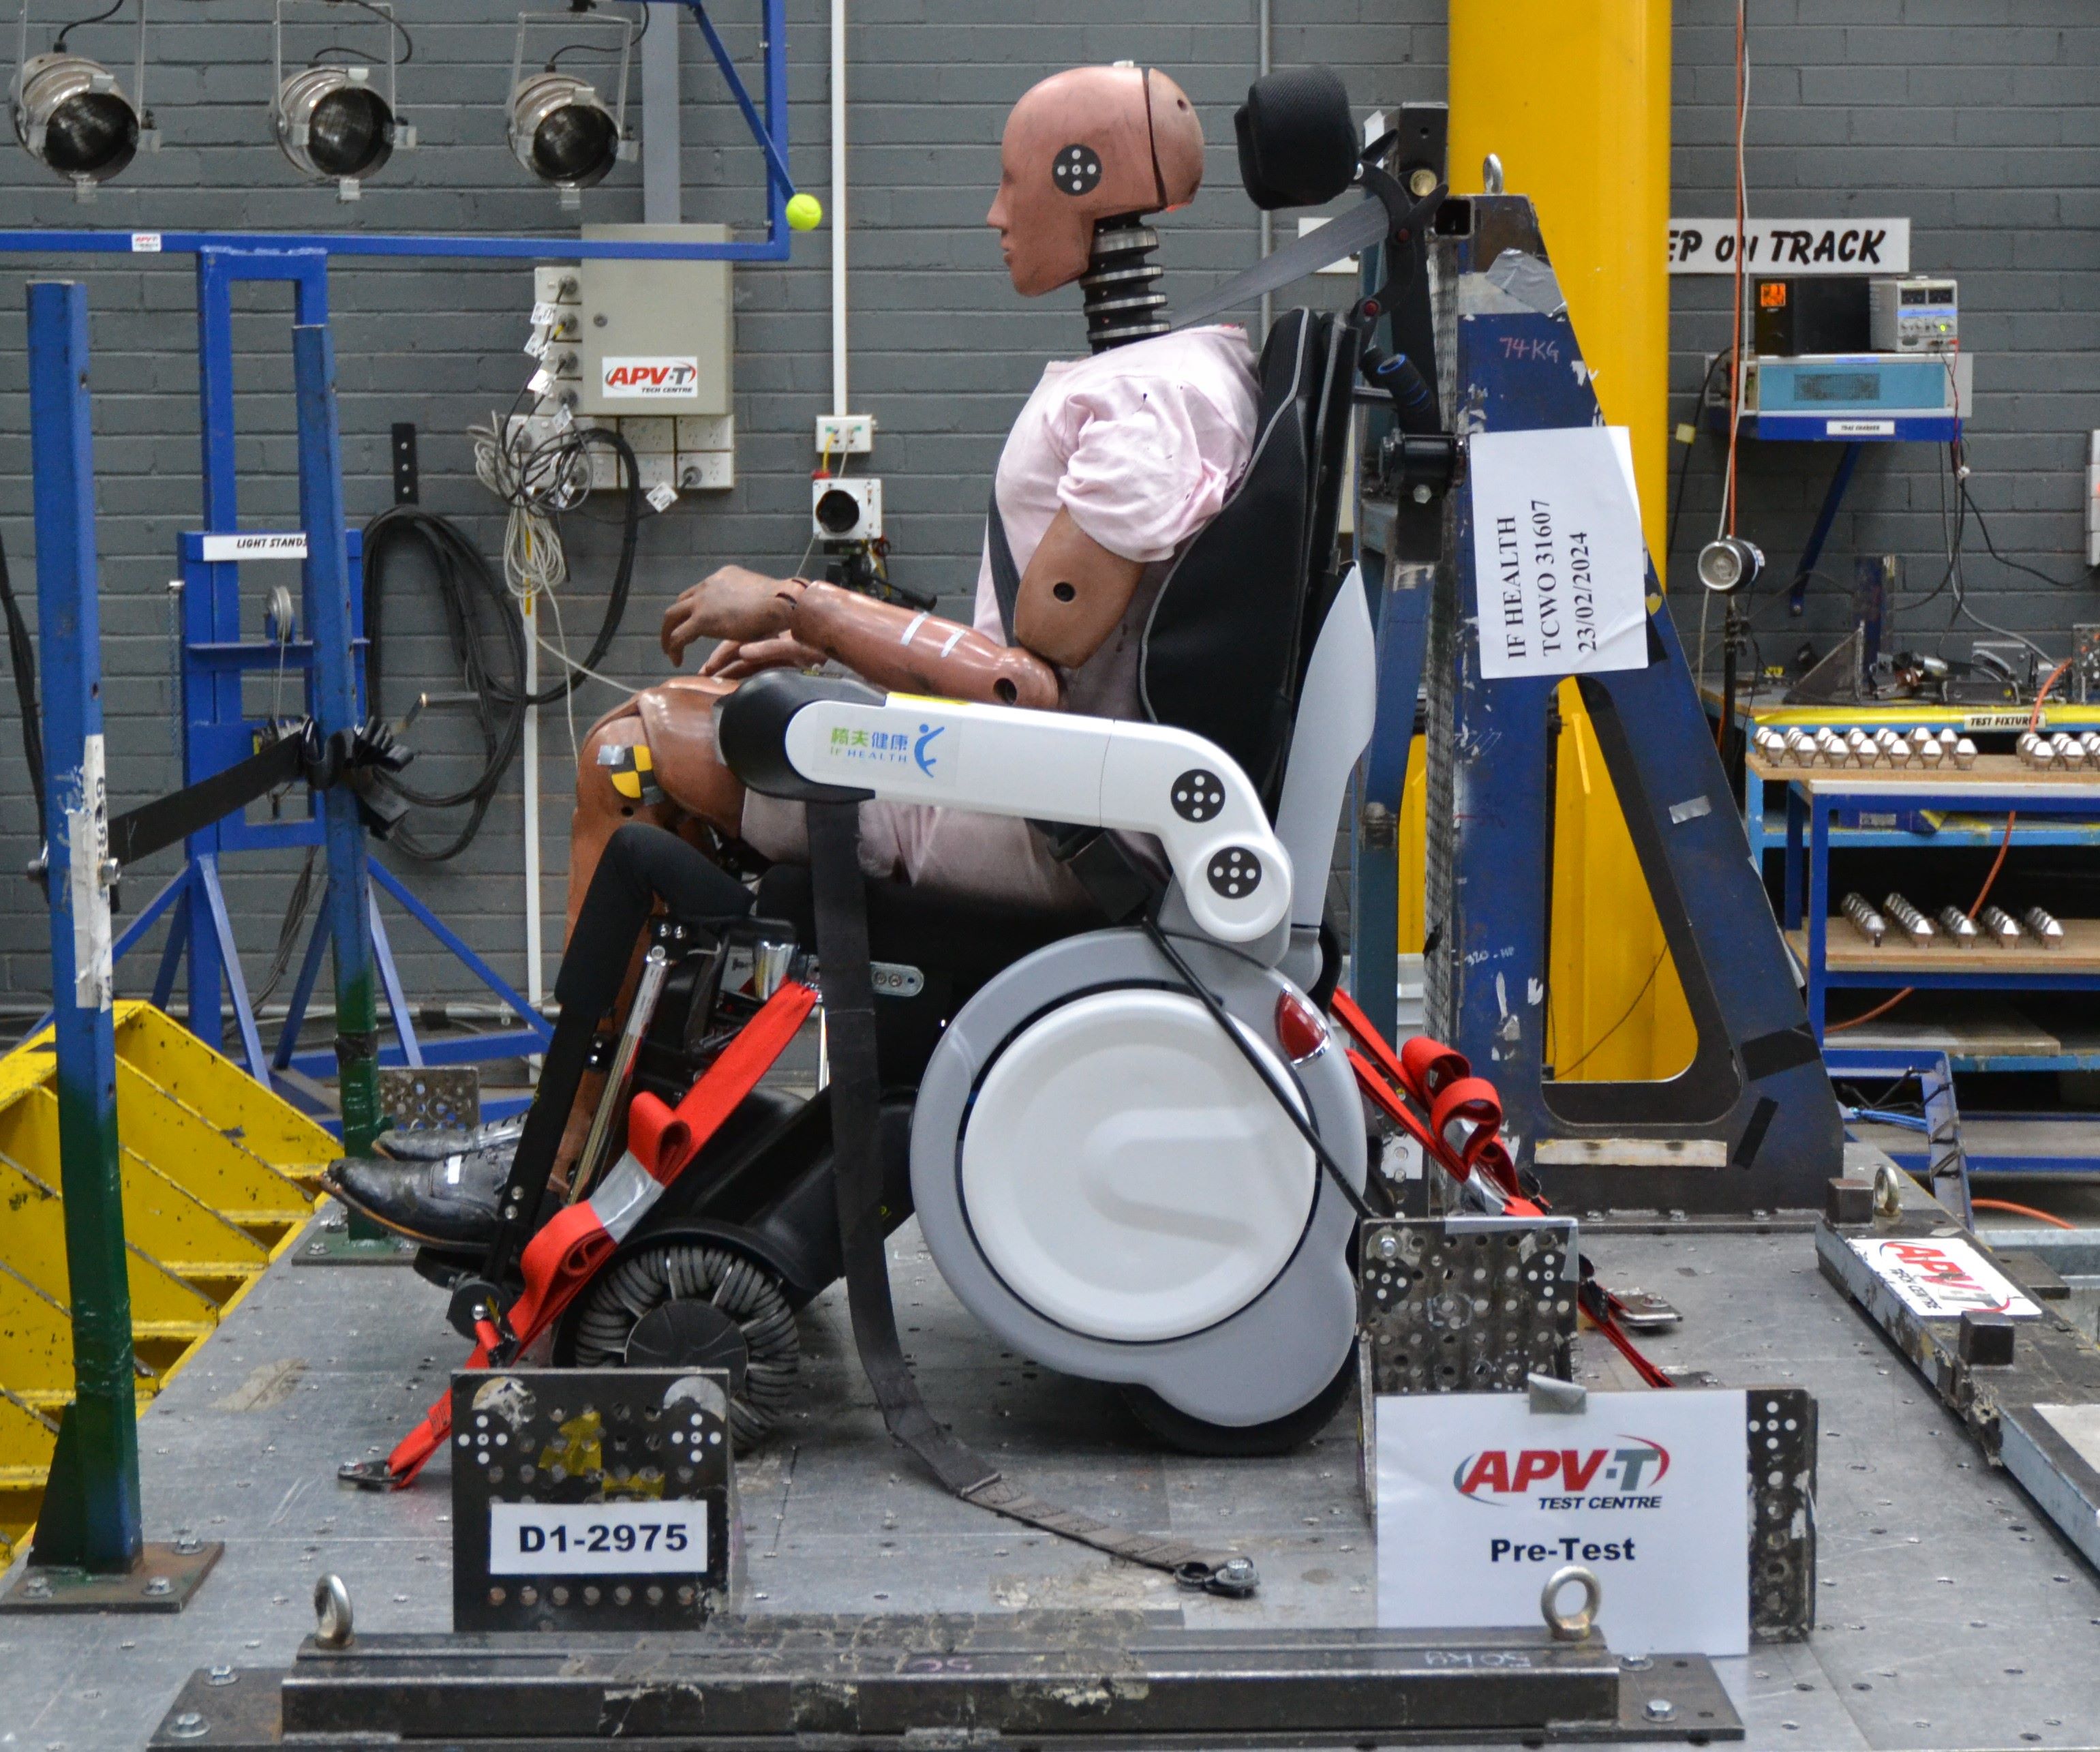 Safety Meets Performance – IF HEALTH Wheelchair Receives Safety Certification from the APV